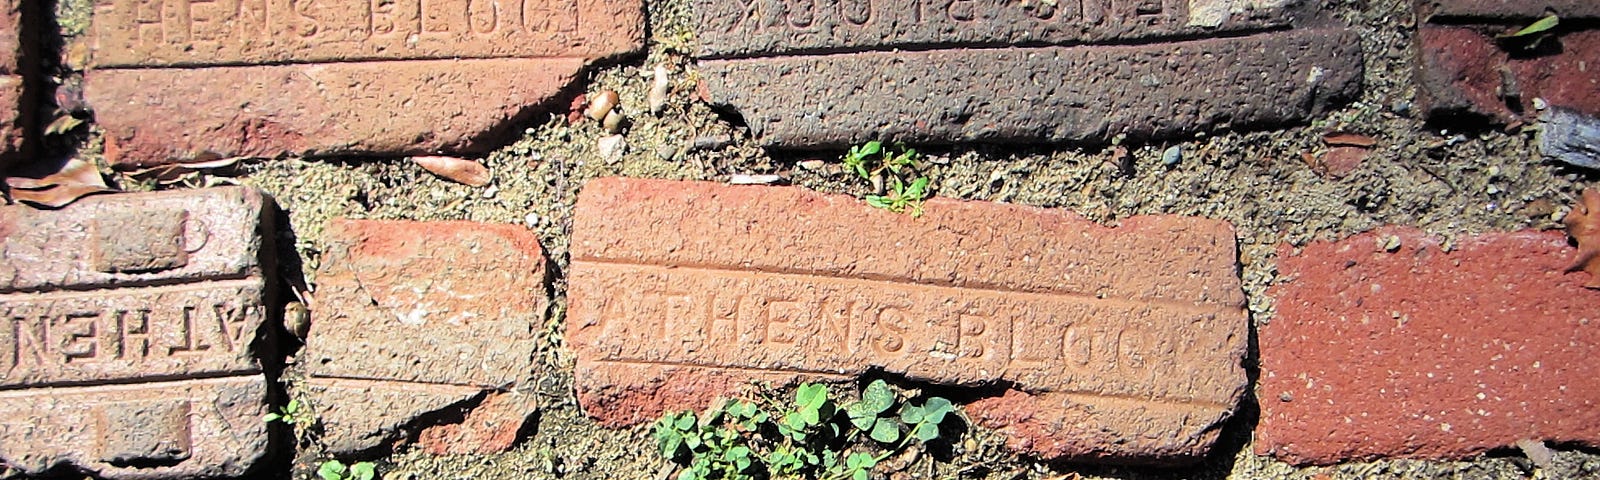 Photograph of brick pathway laid with red bricks. The bricks are stamped with ATHENS BLOCK.